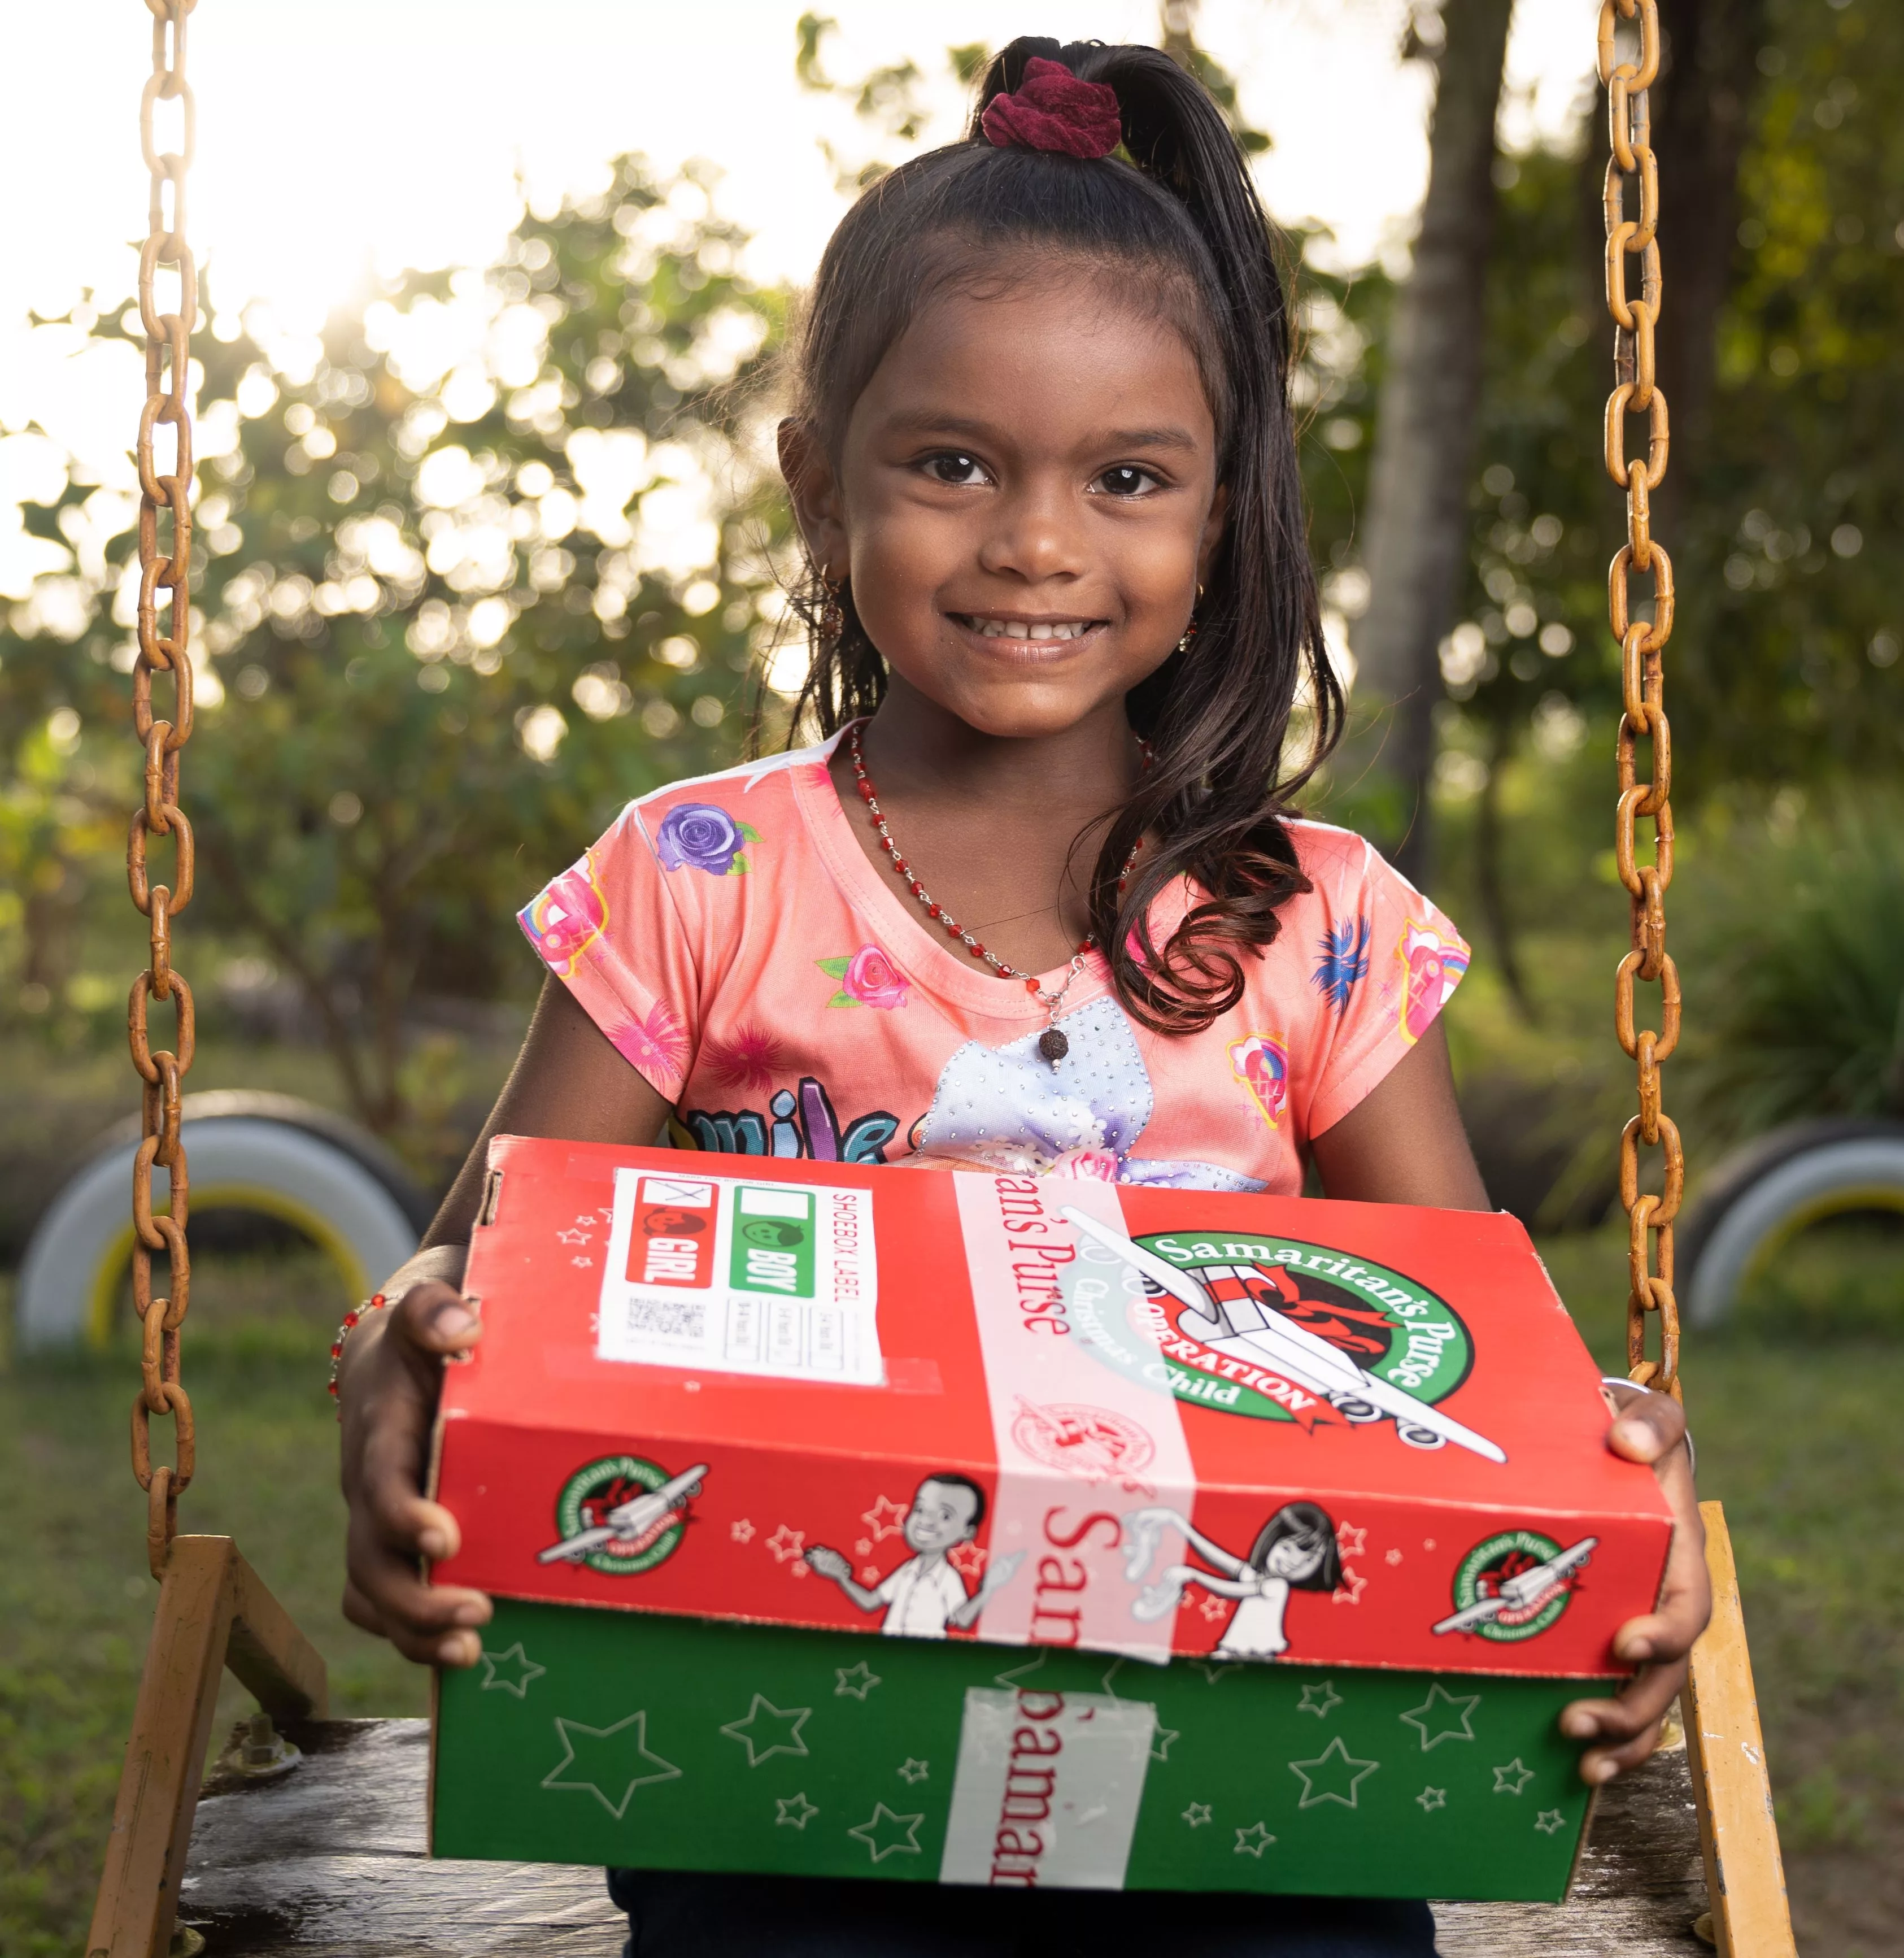 Operation Christmas Child: sharing Christmas joy with children in need